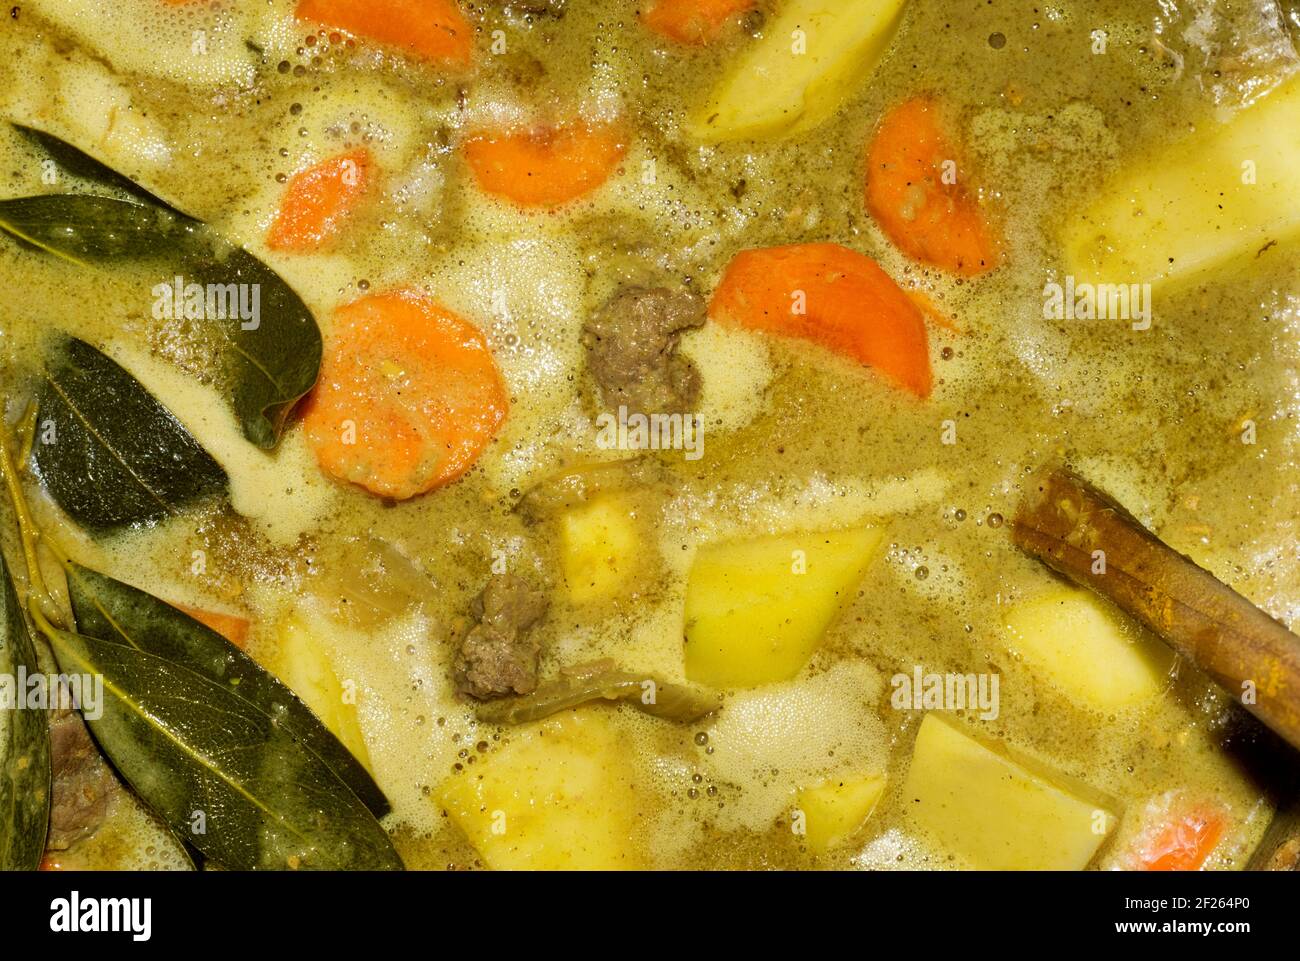 Beef stew simmering in a pot on a stove seen from directly above. Bay leaves visible with mixed vegetables and wooden spoon with copy space. Stock Photo